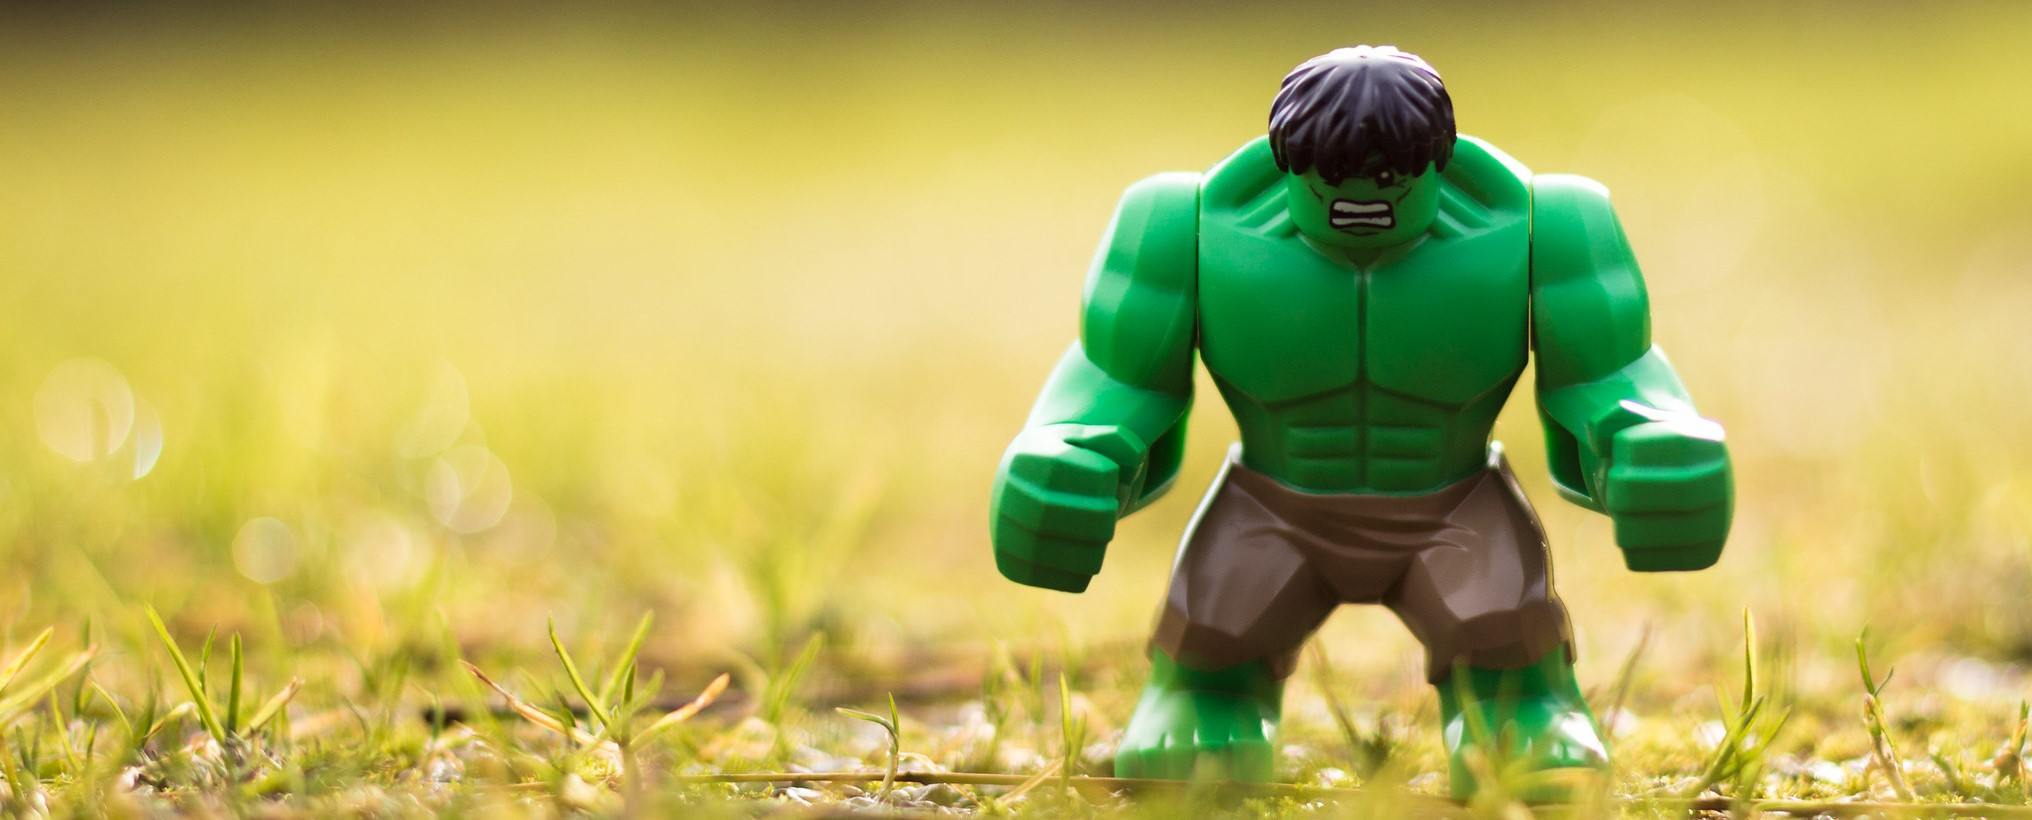 A photo of LEGO Hulk, who I don't think eats protein to look like that.